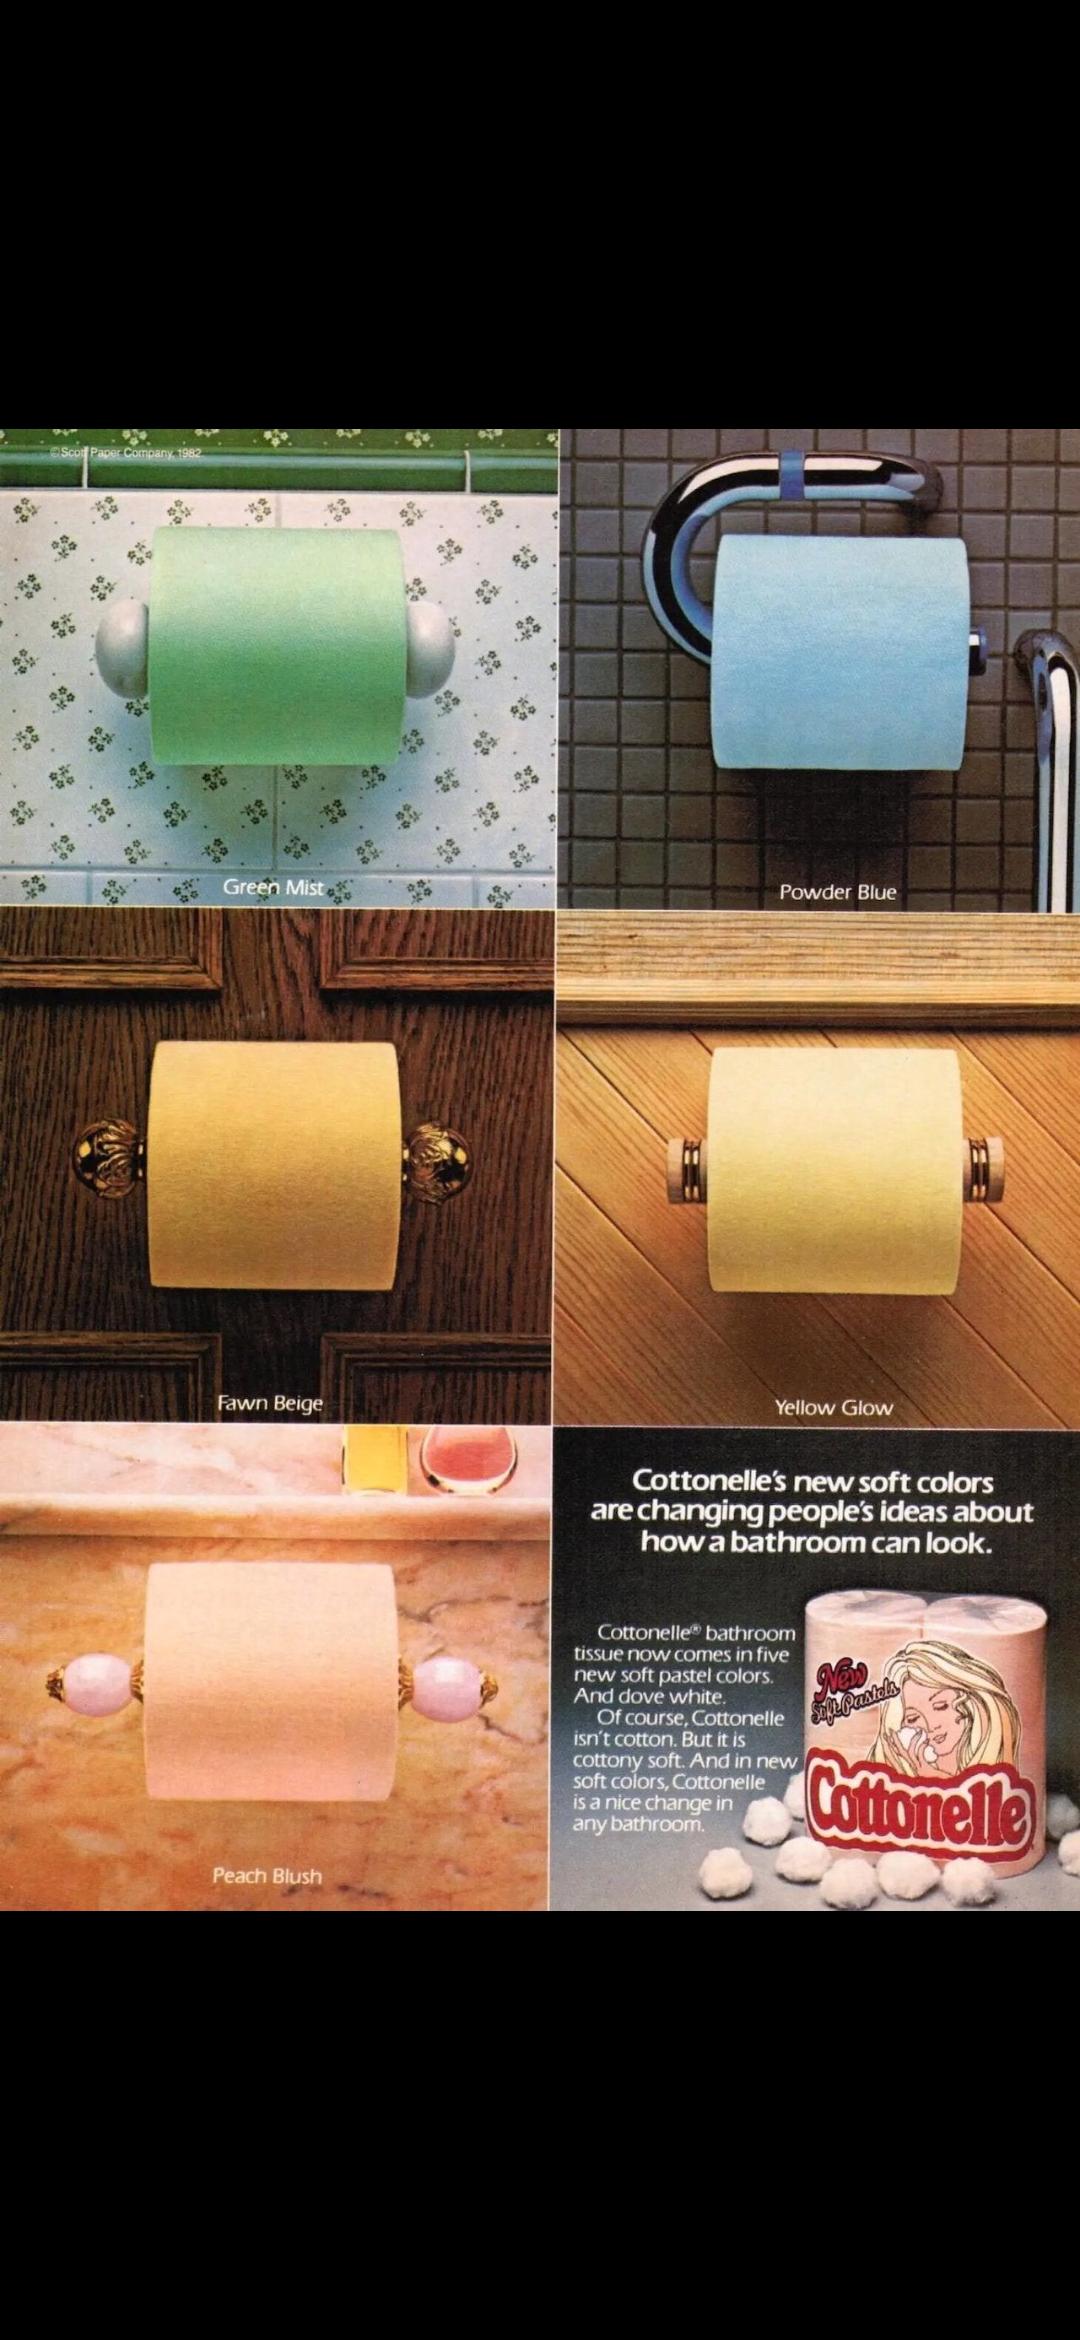 Colored toilet paper was common in the 80's. #bringitback